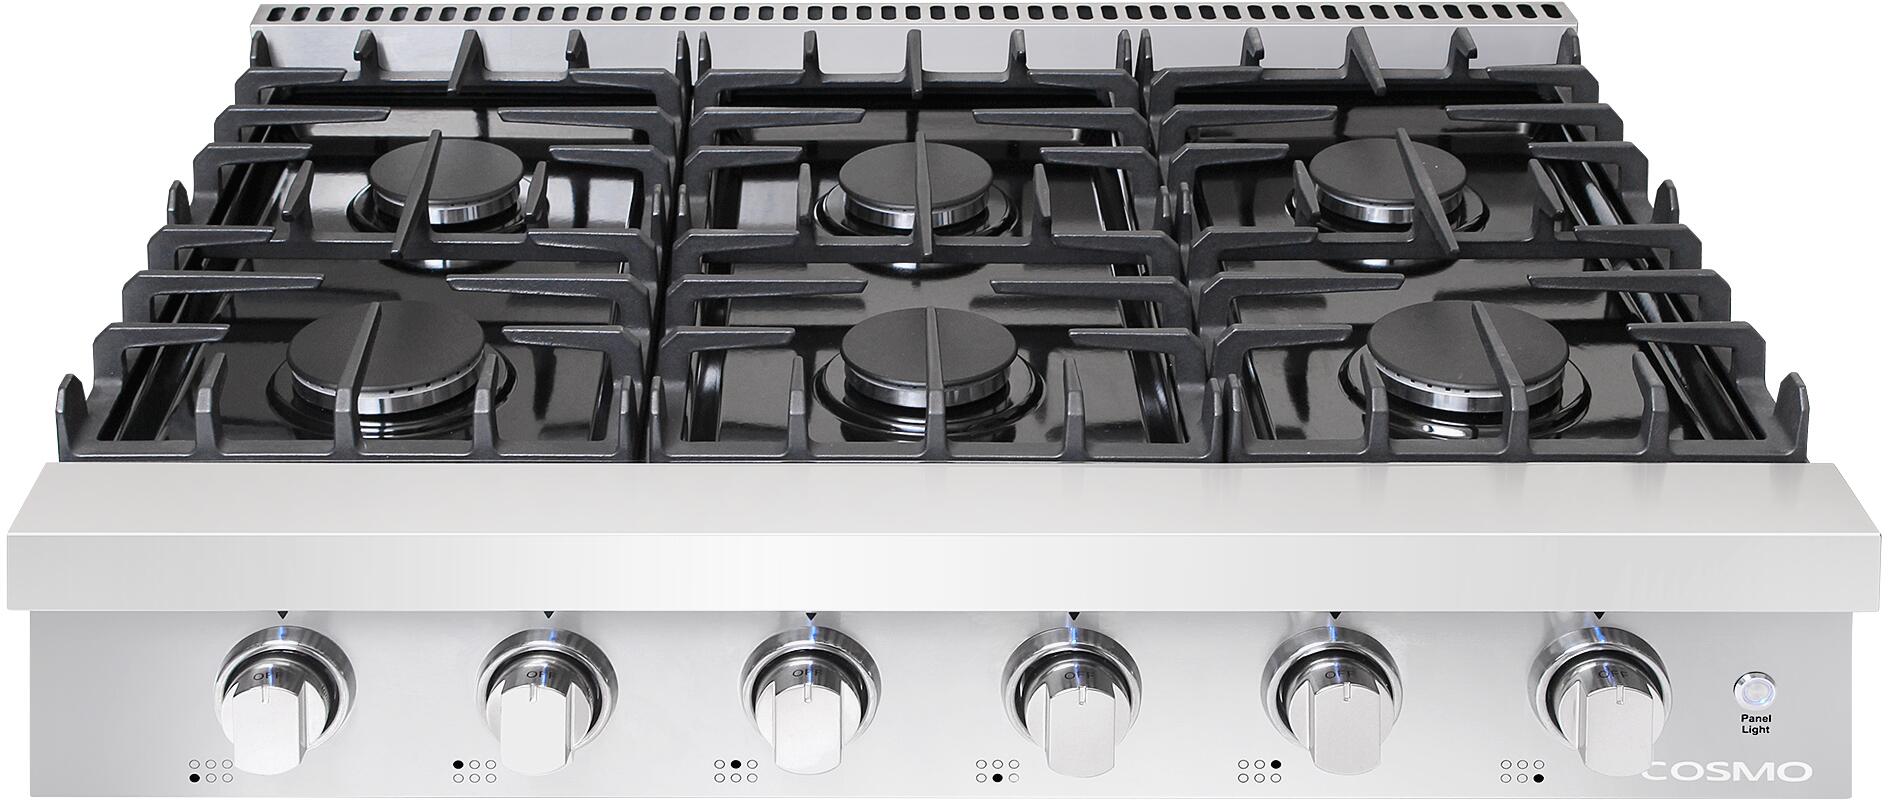 Cosmo - 36 in. Slide-In Counter Gas Cooktop with 6 Sealed Italian Burners, Black Porcelain Surface, Cast Iron Grates, Metal Knobs in Stainless Steel | COS-GRT366